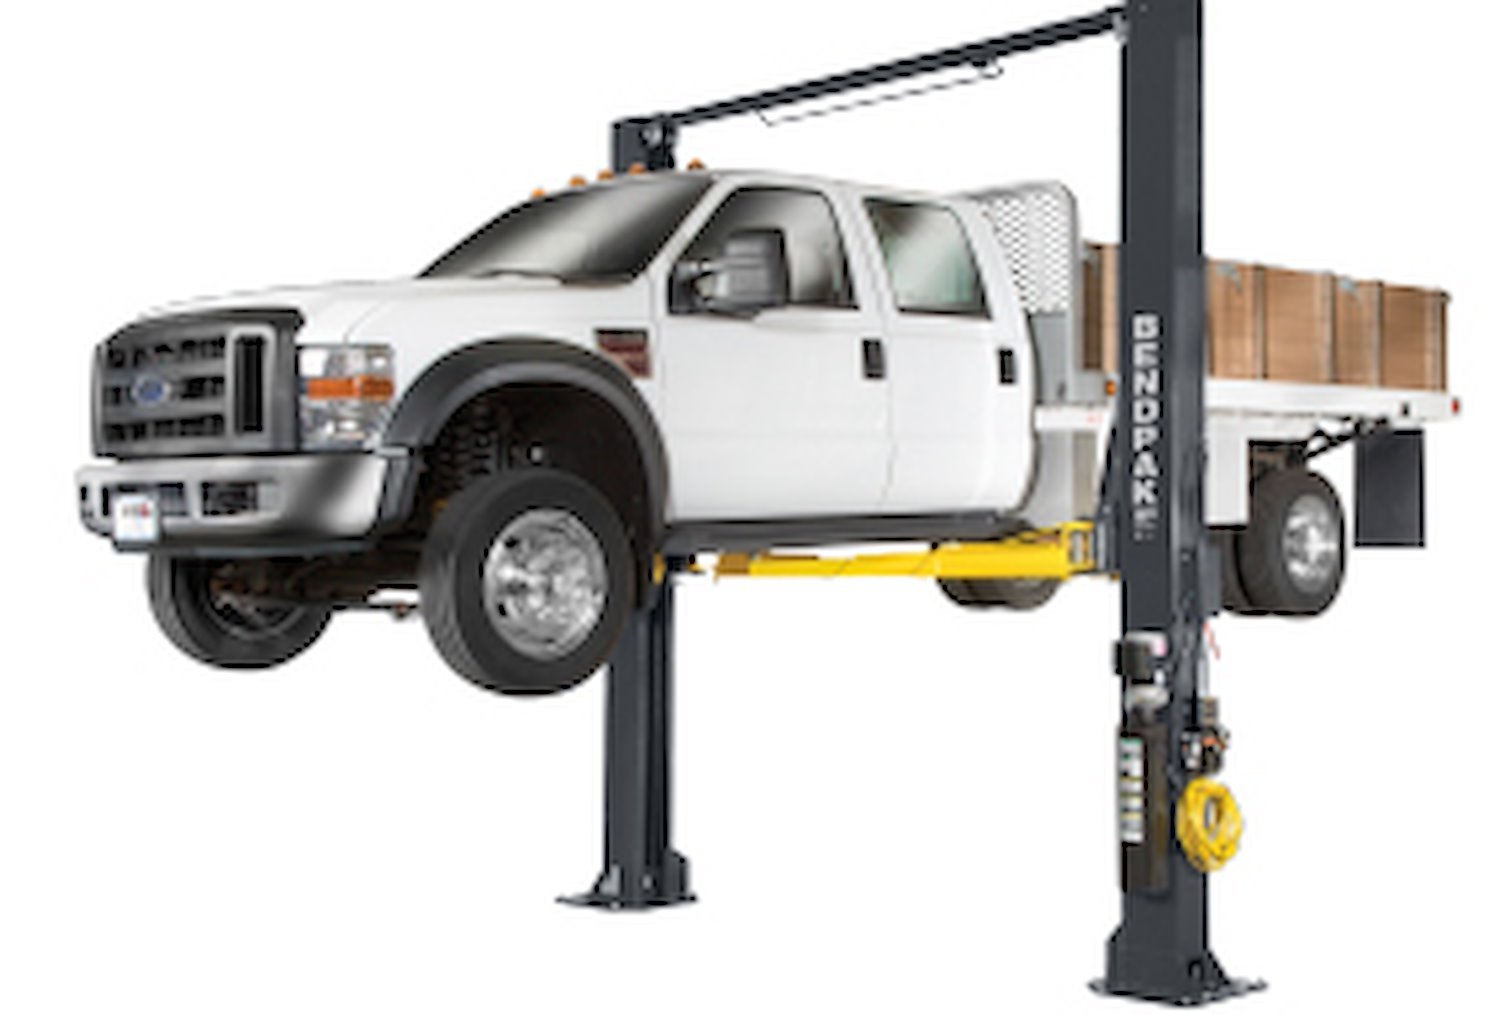 XPR-12CL-192 Two-Post Lift, 12,000-lb. Capacity